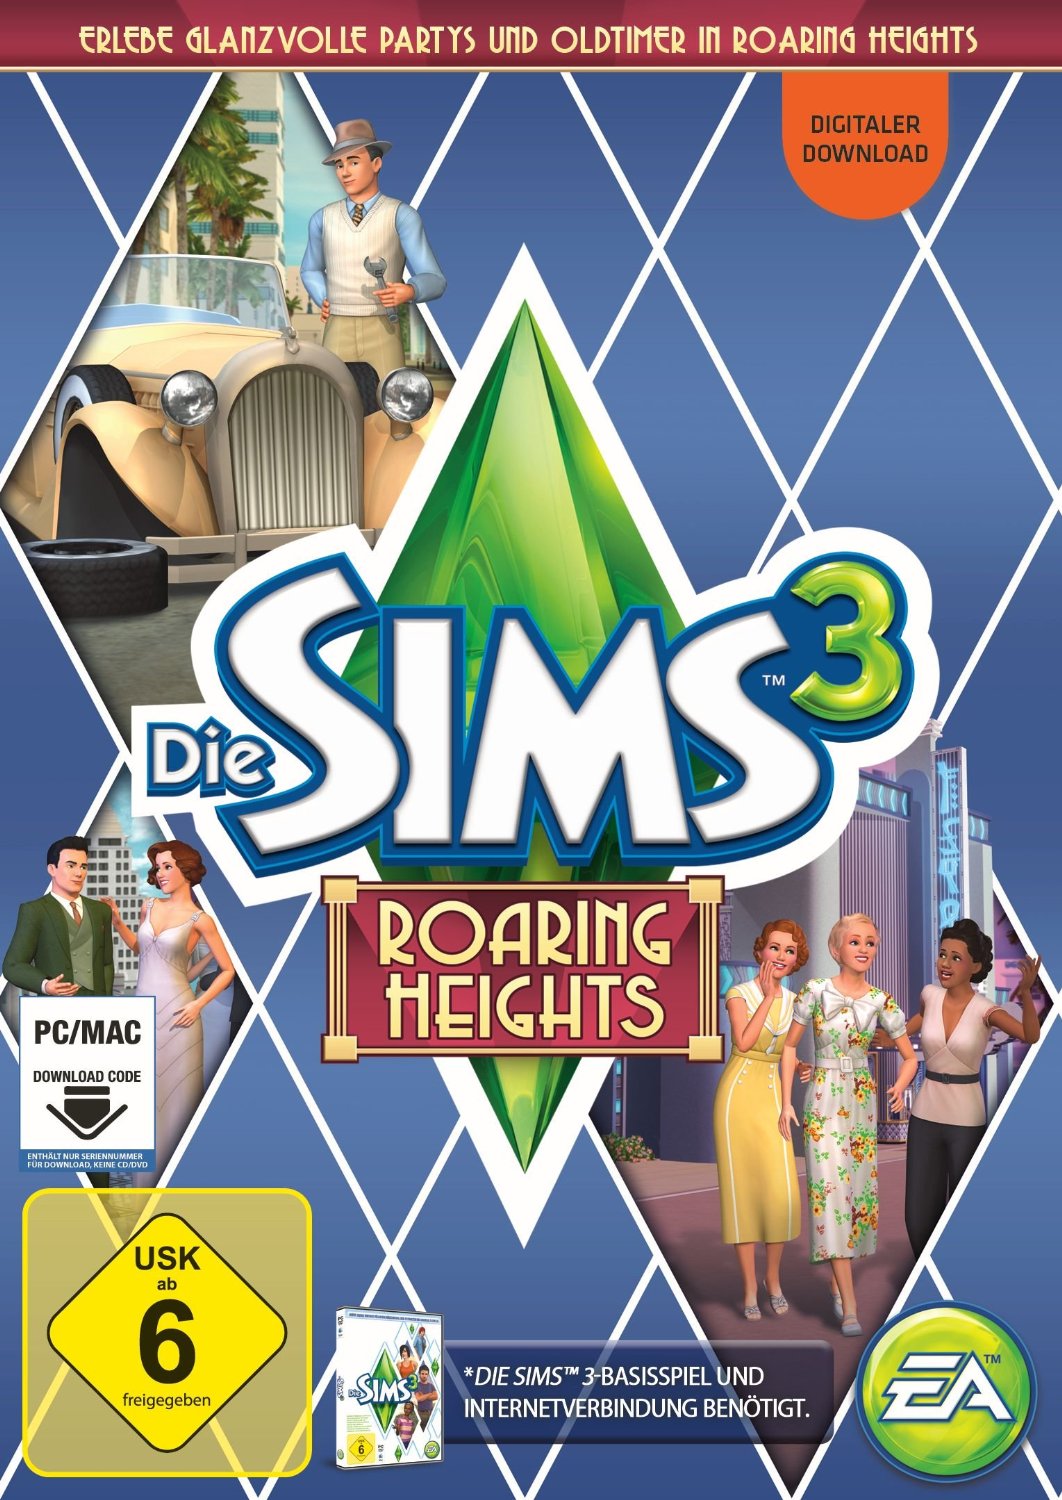 How To Download Sims 3 Add-ons - Game Download Keys